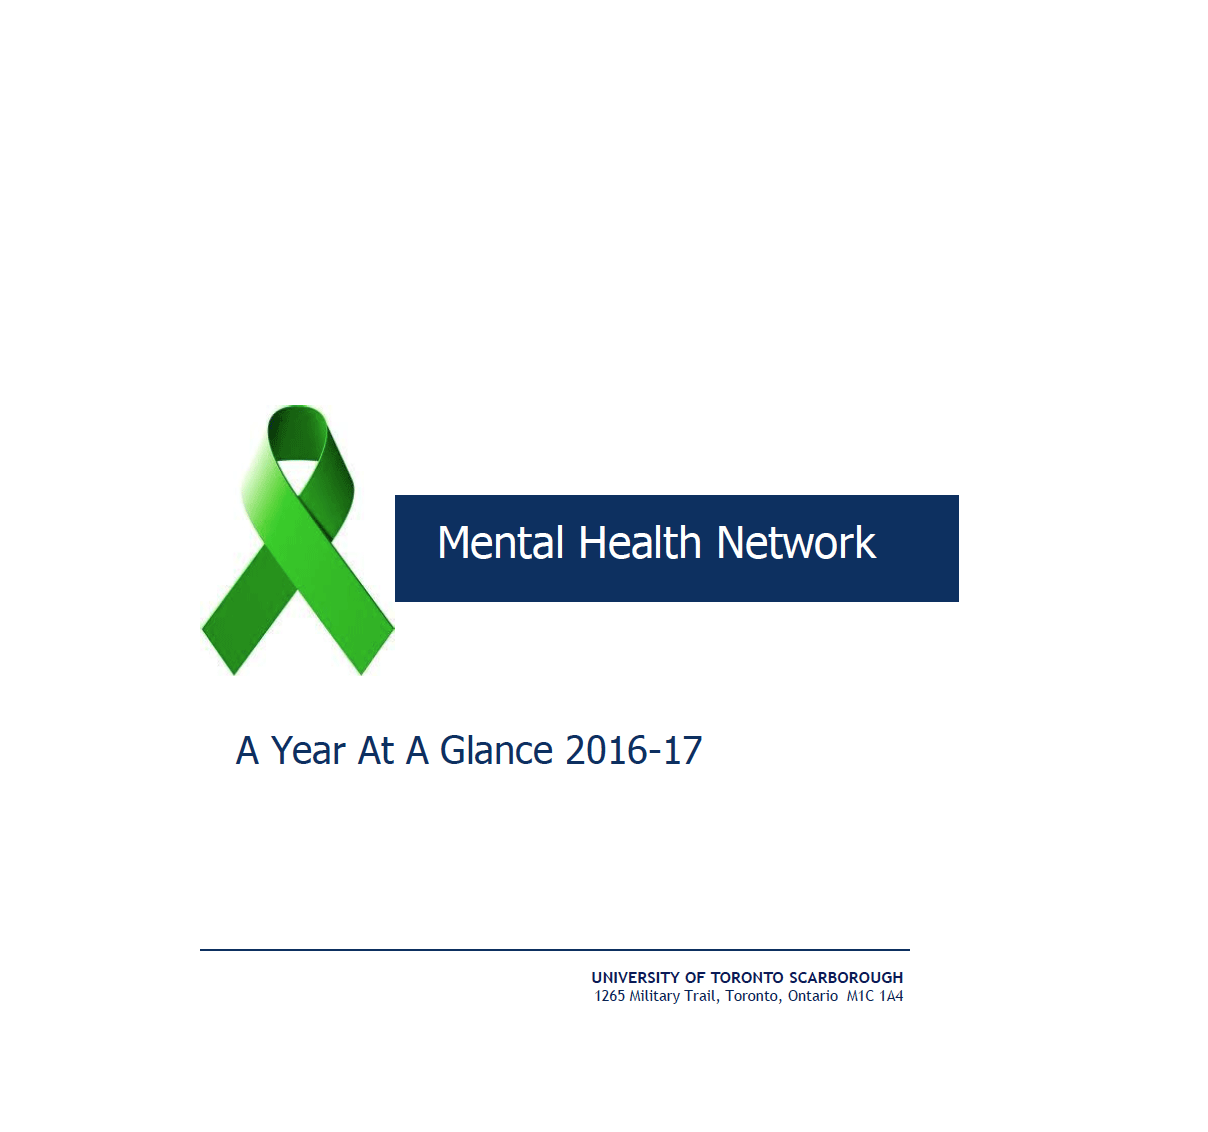 mental health network a year at a glance 2016-17